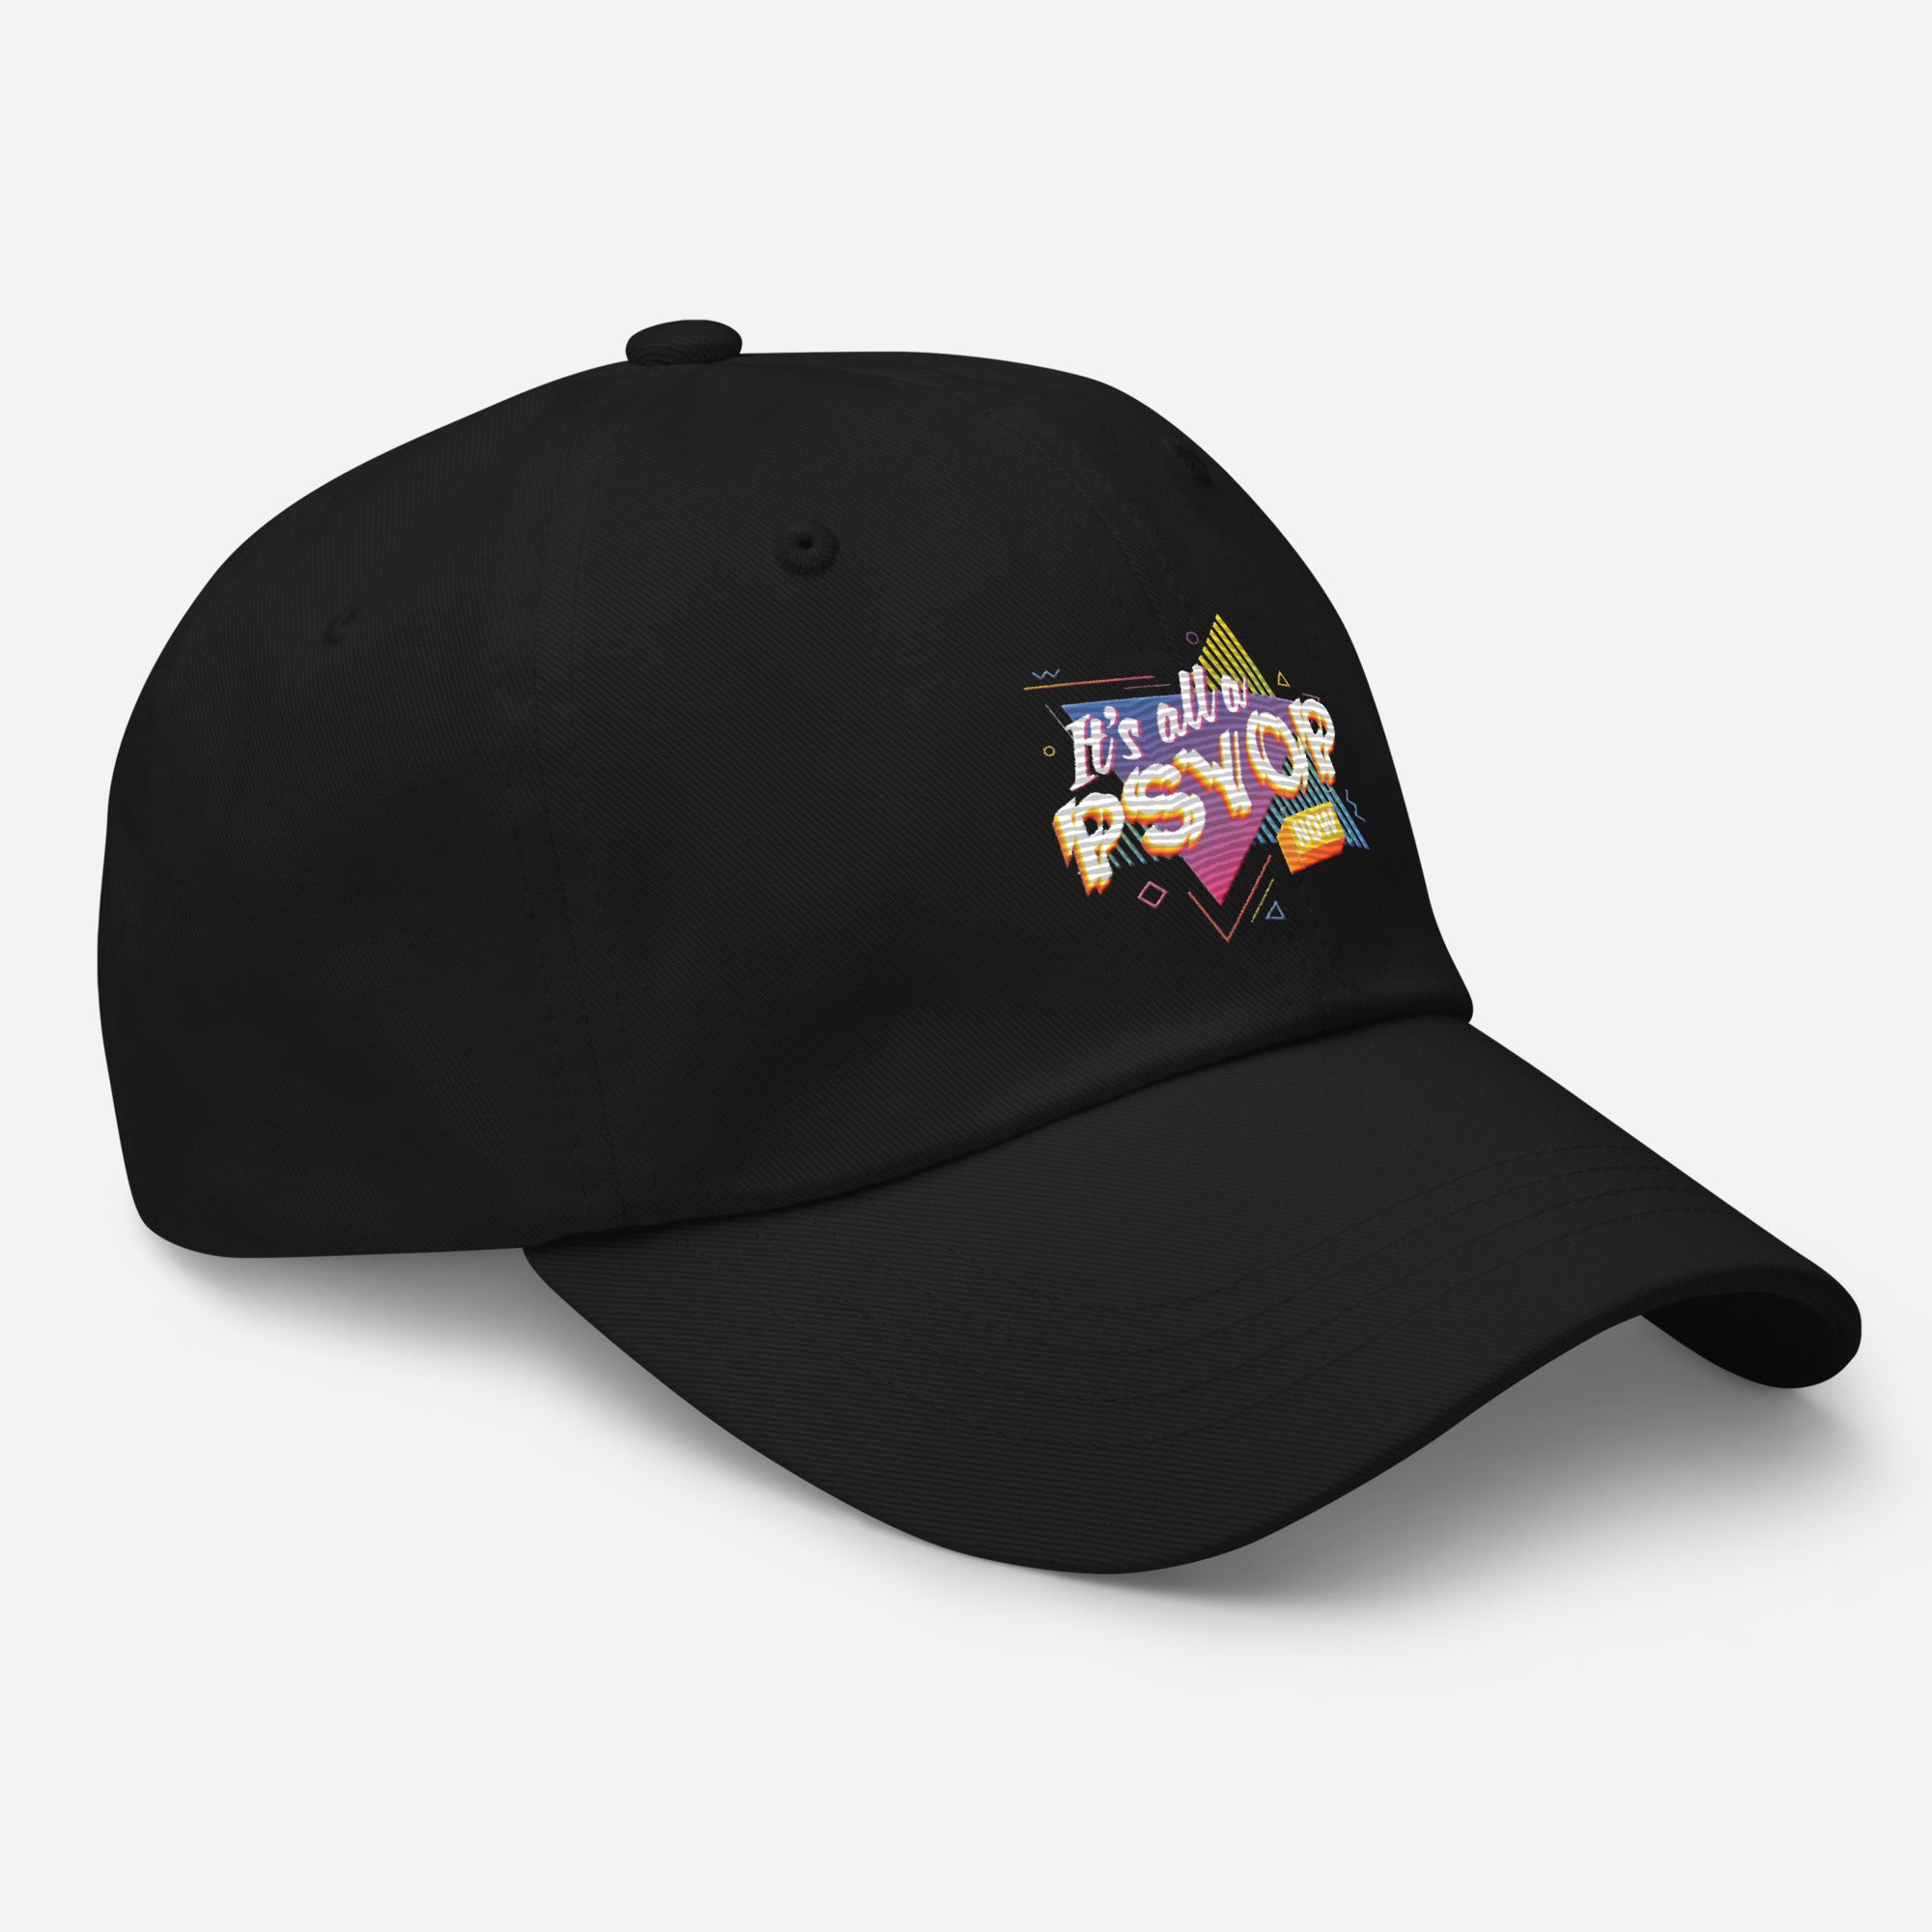 It's All A Psyop Now Dad hat